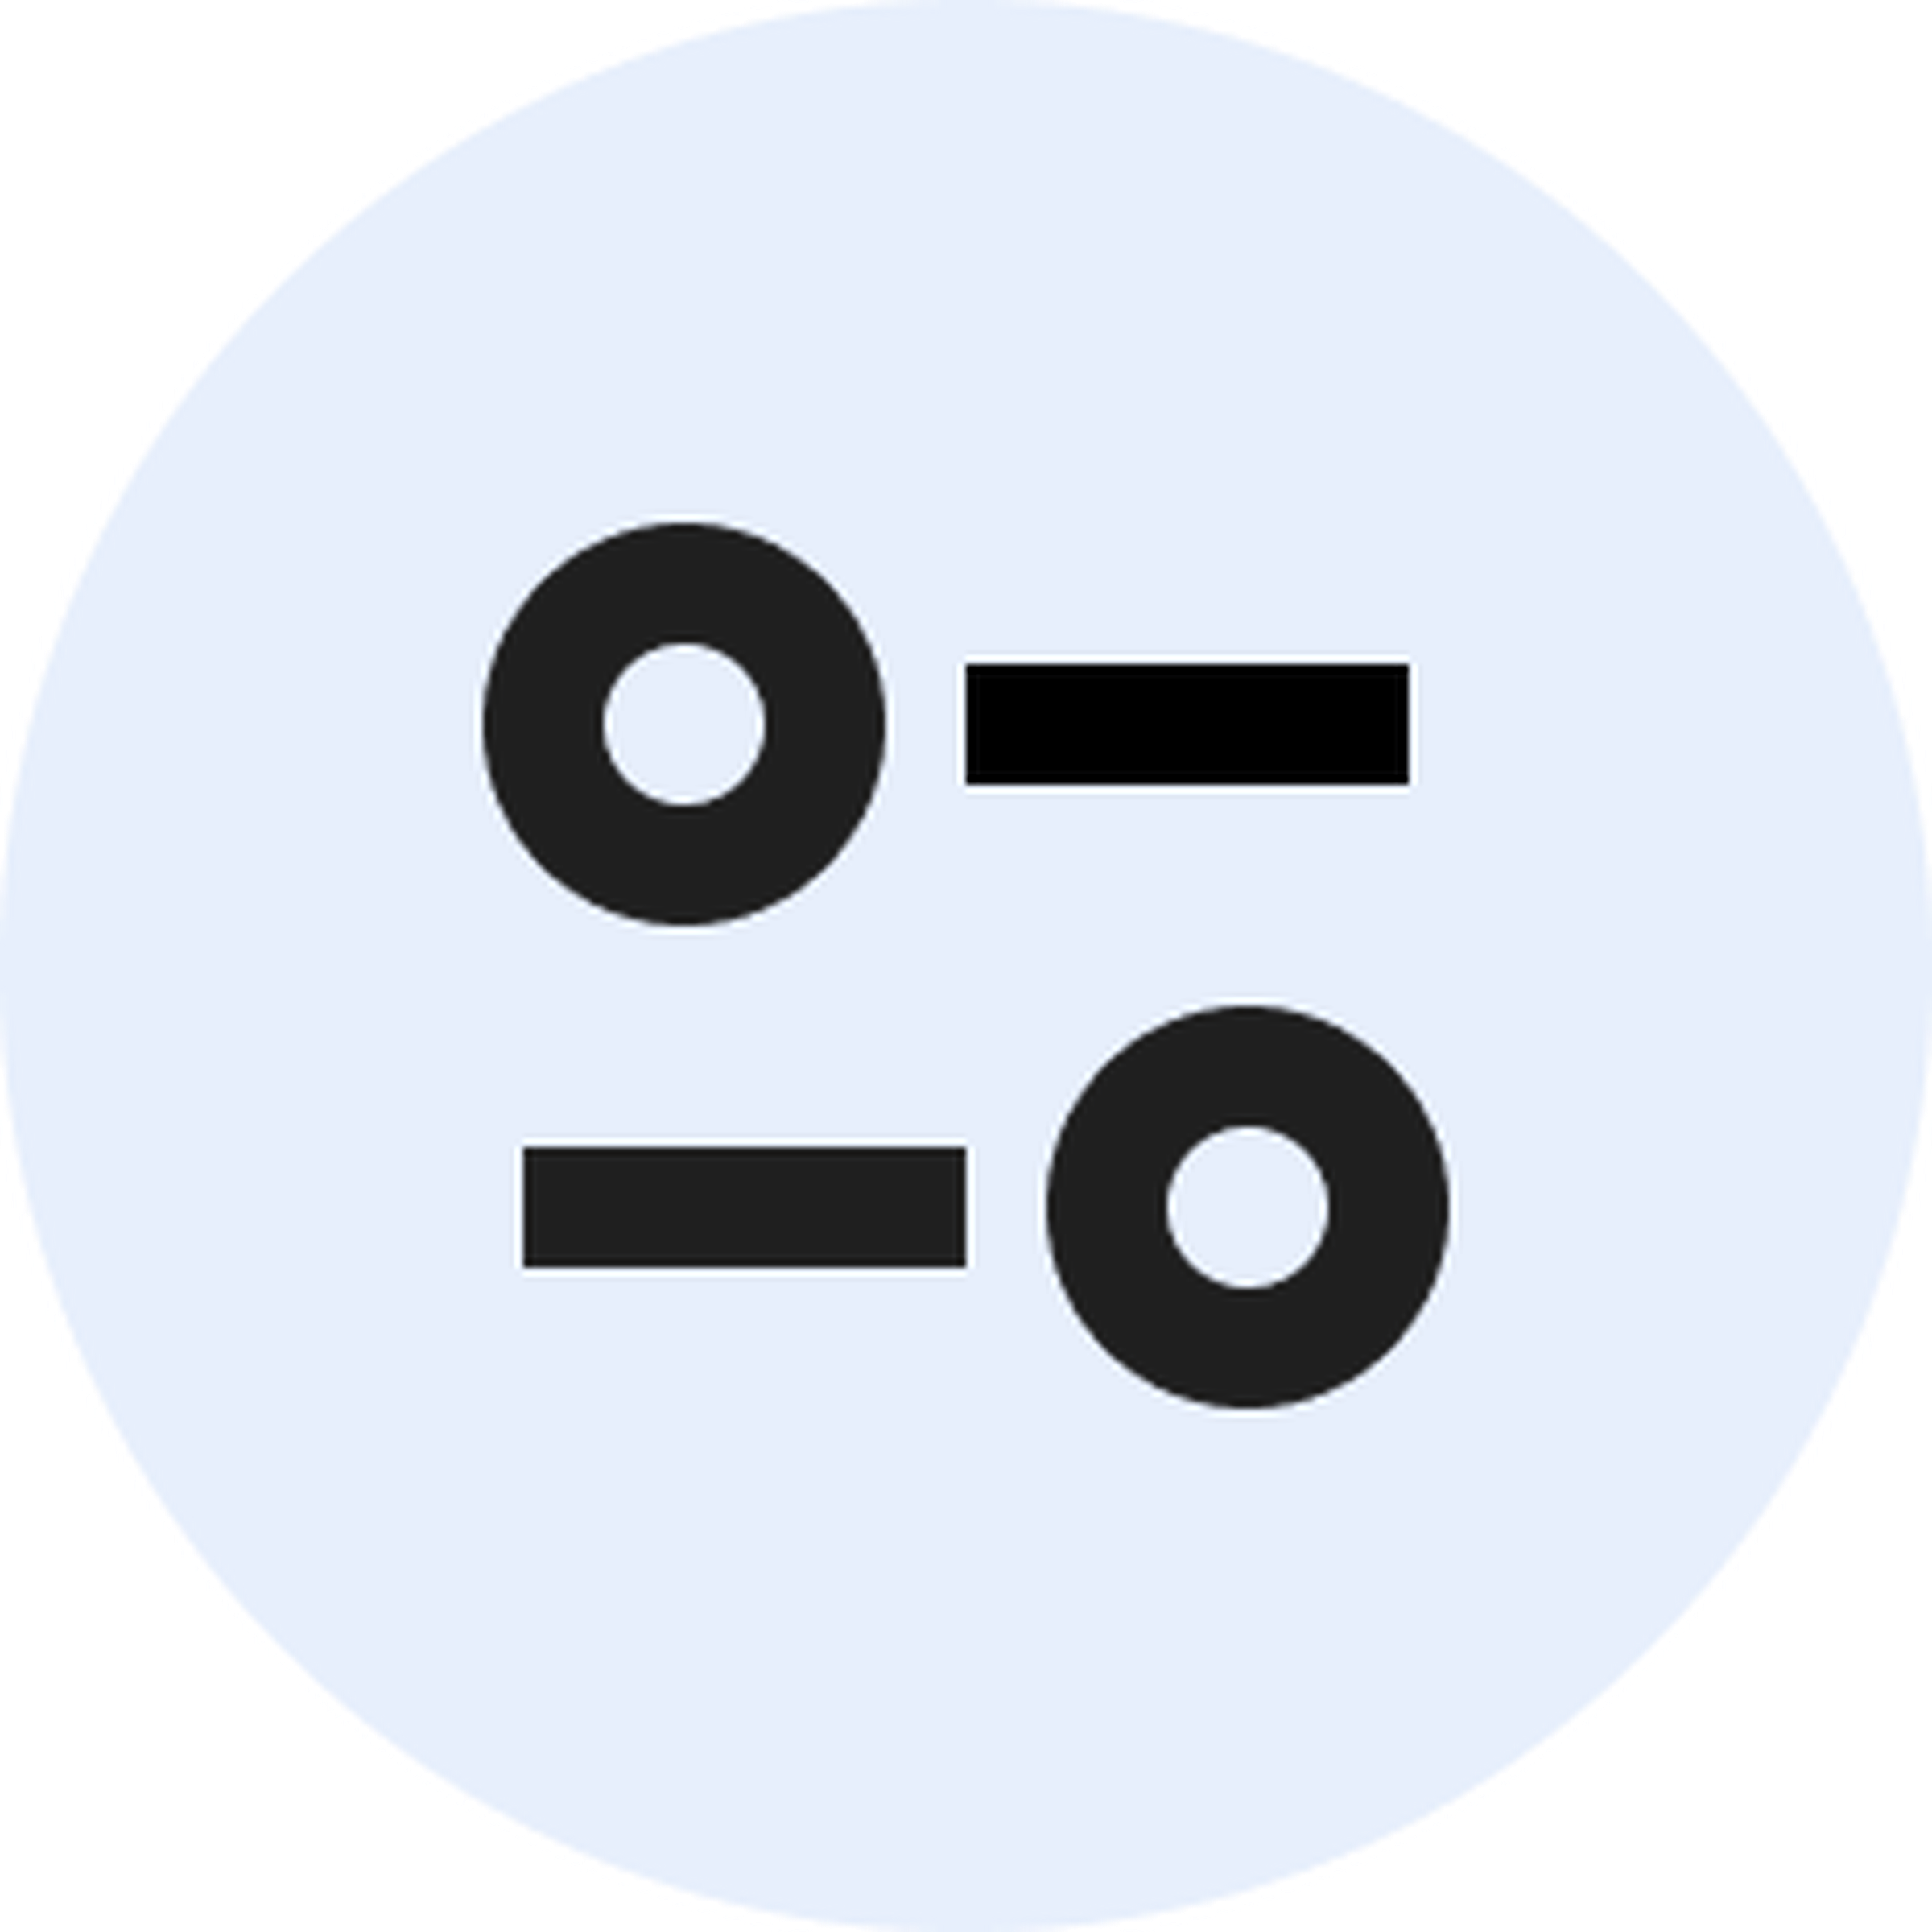 The new tune icon set to replace the lock icon in Google Chrome in September 2023.